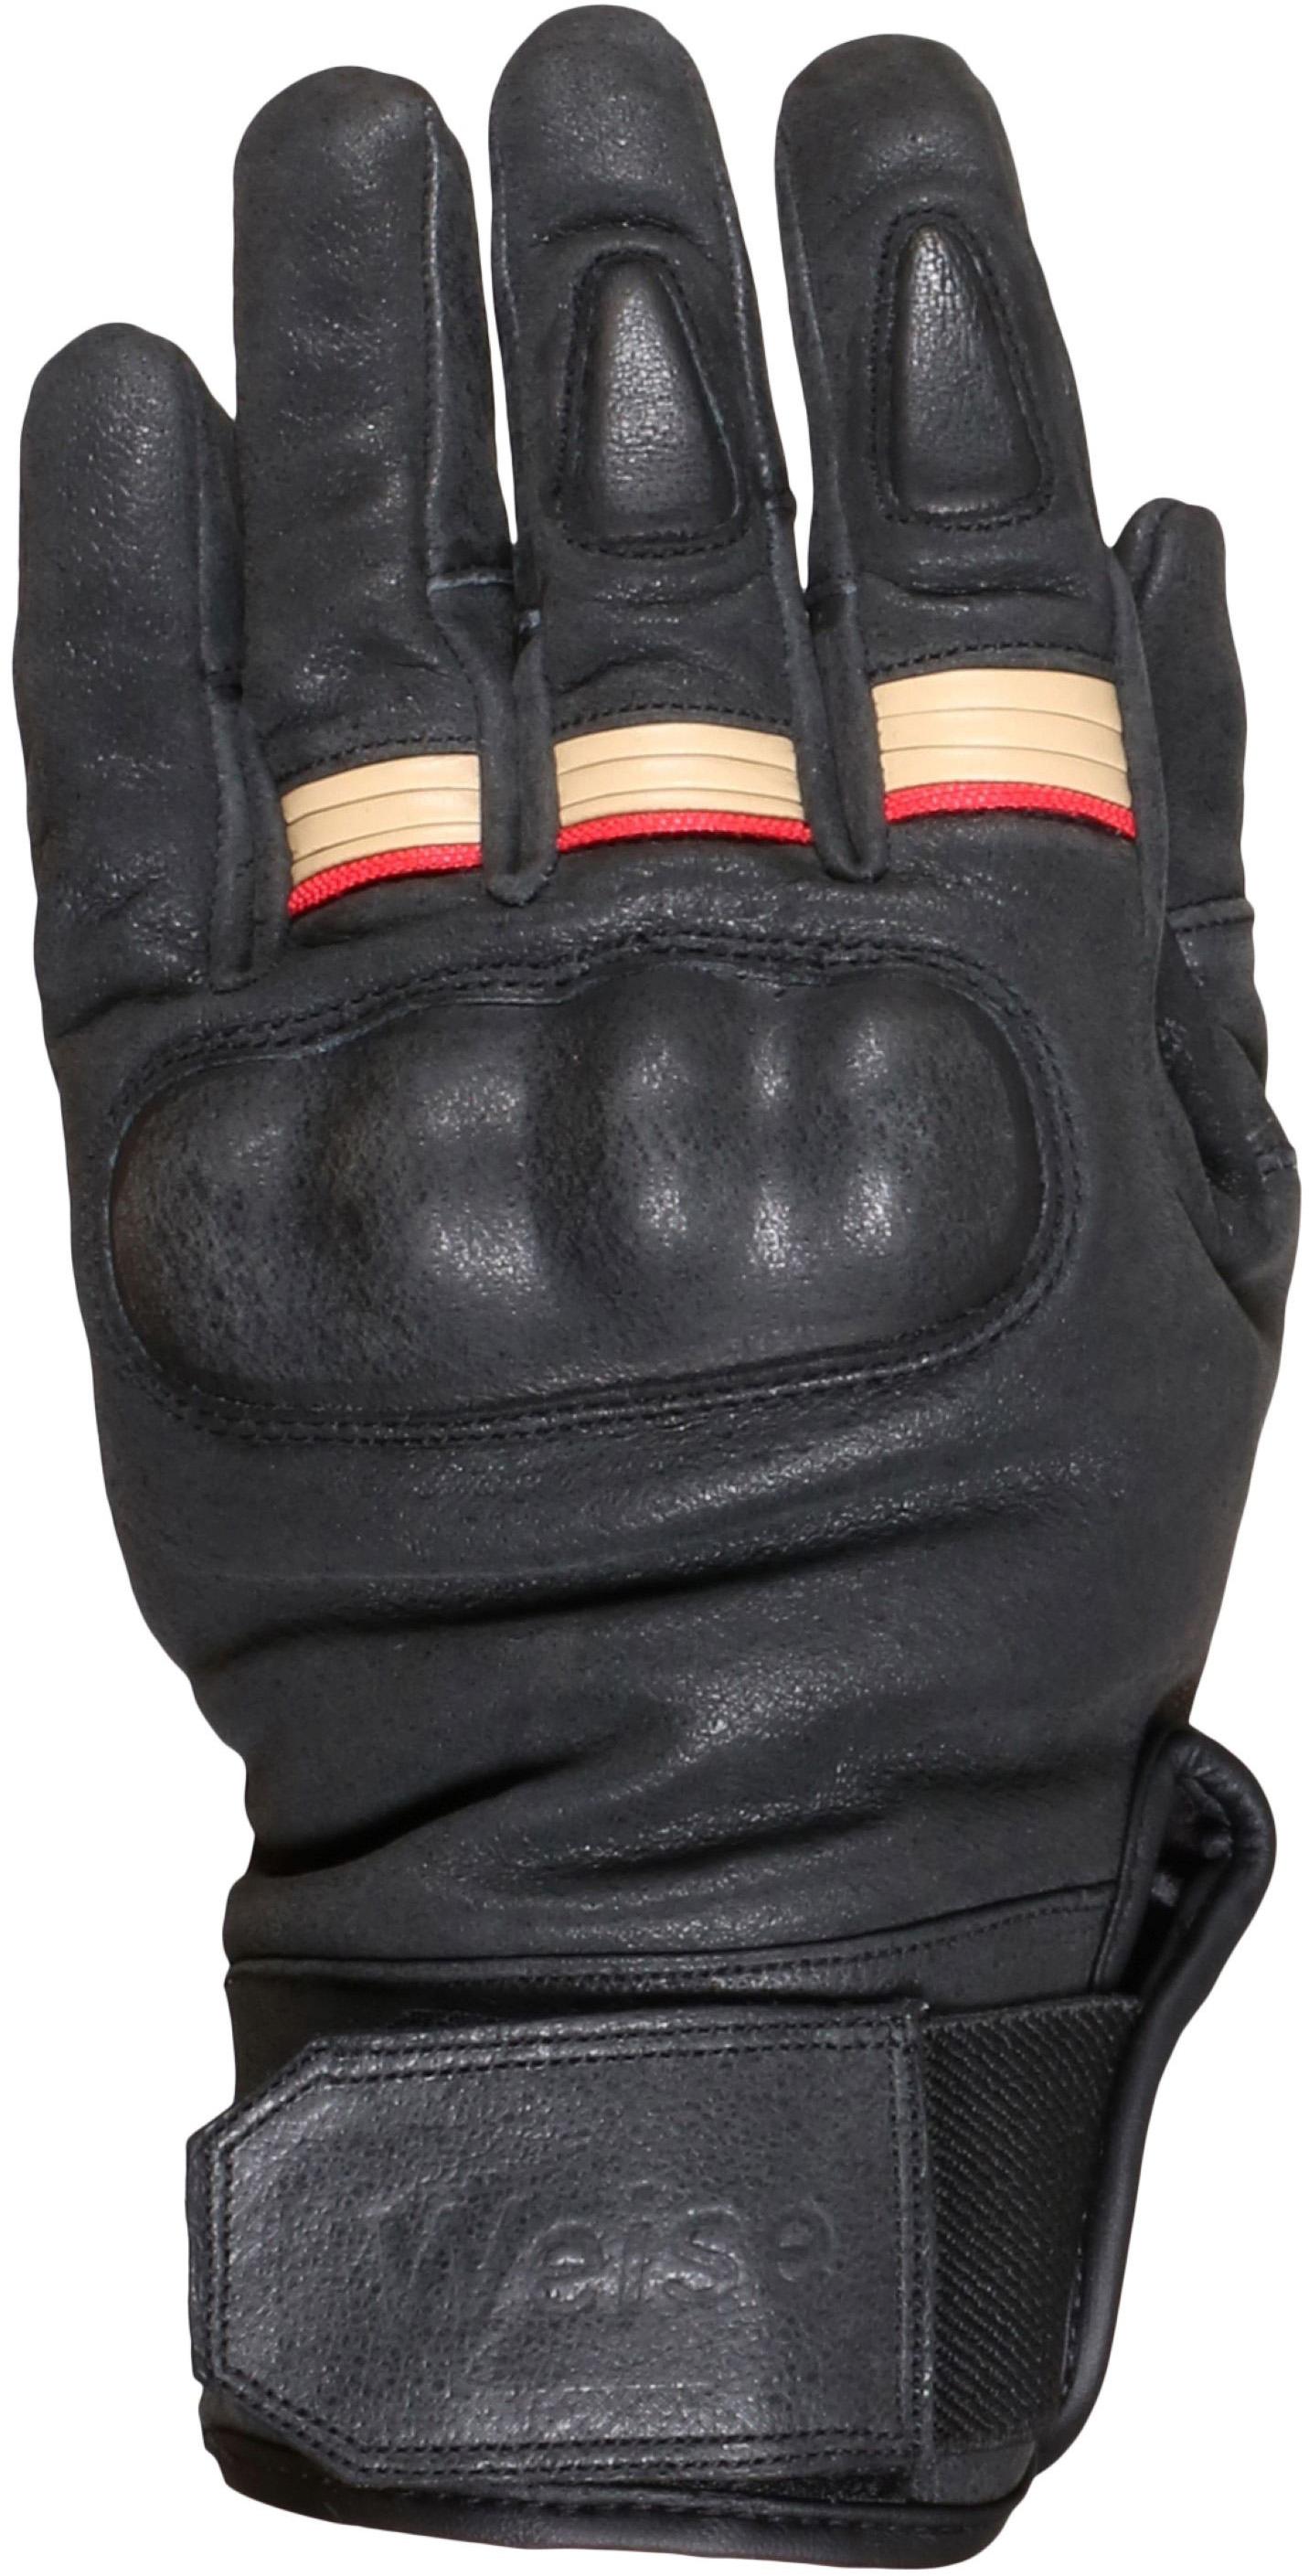 Weise Detroit Motorcycle Gloves - Black, S